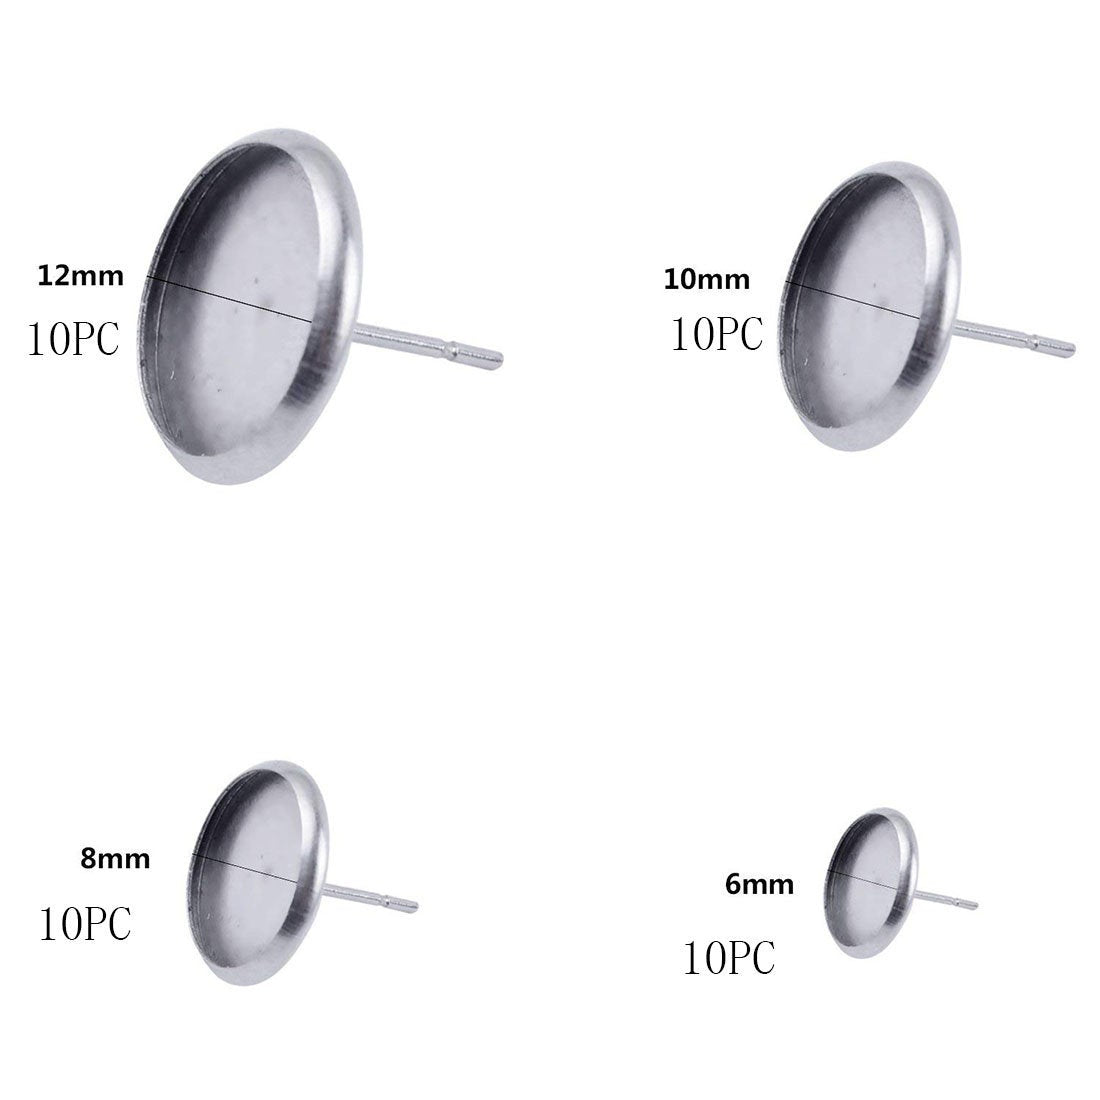 10 Stainless steel ear stud cabochon settings - fits 6, 8, 10 or 12mm cabochons